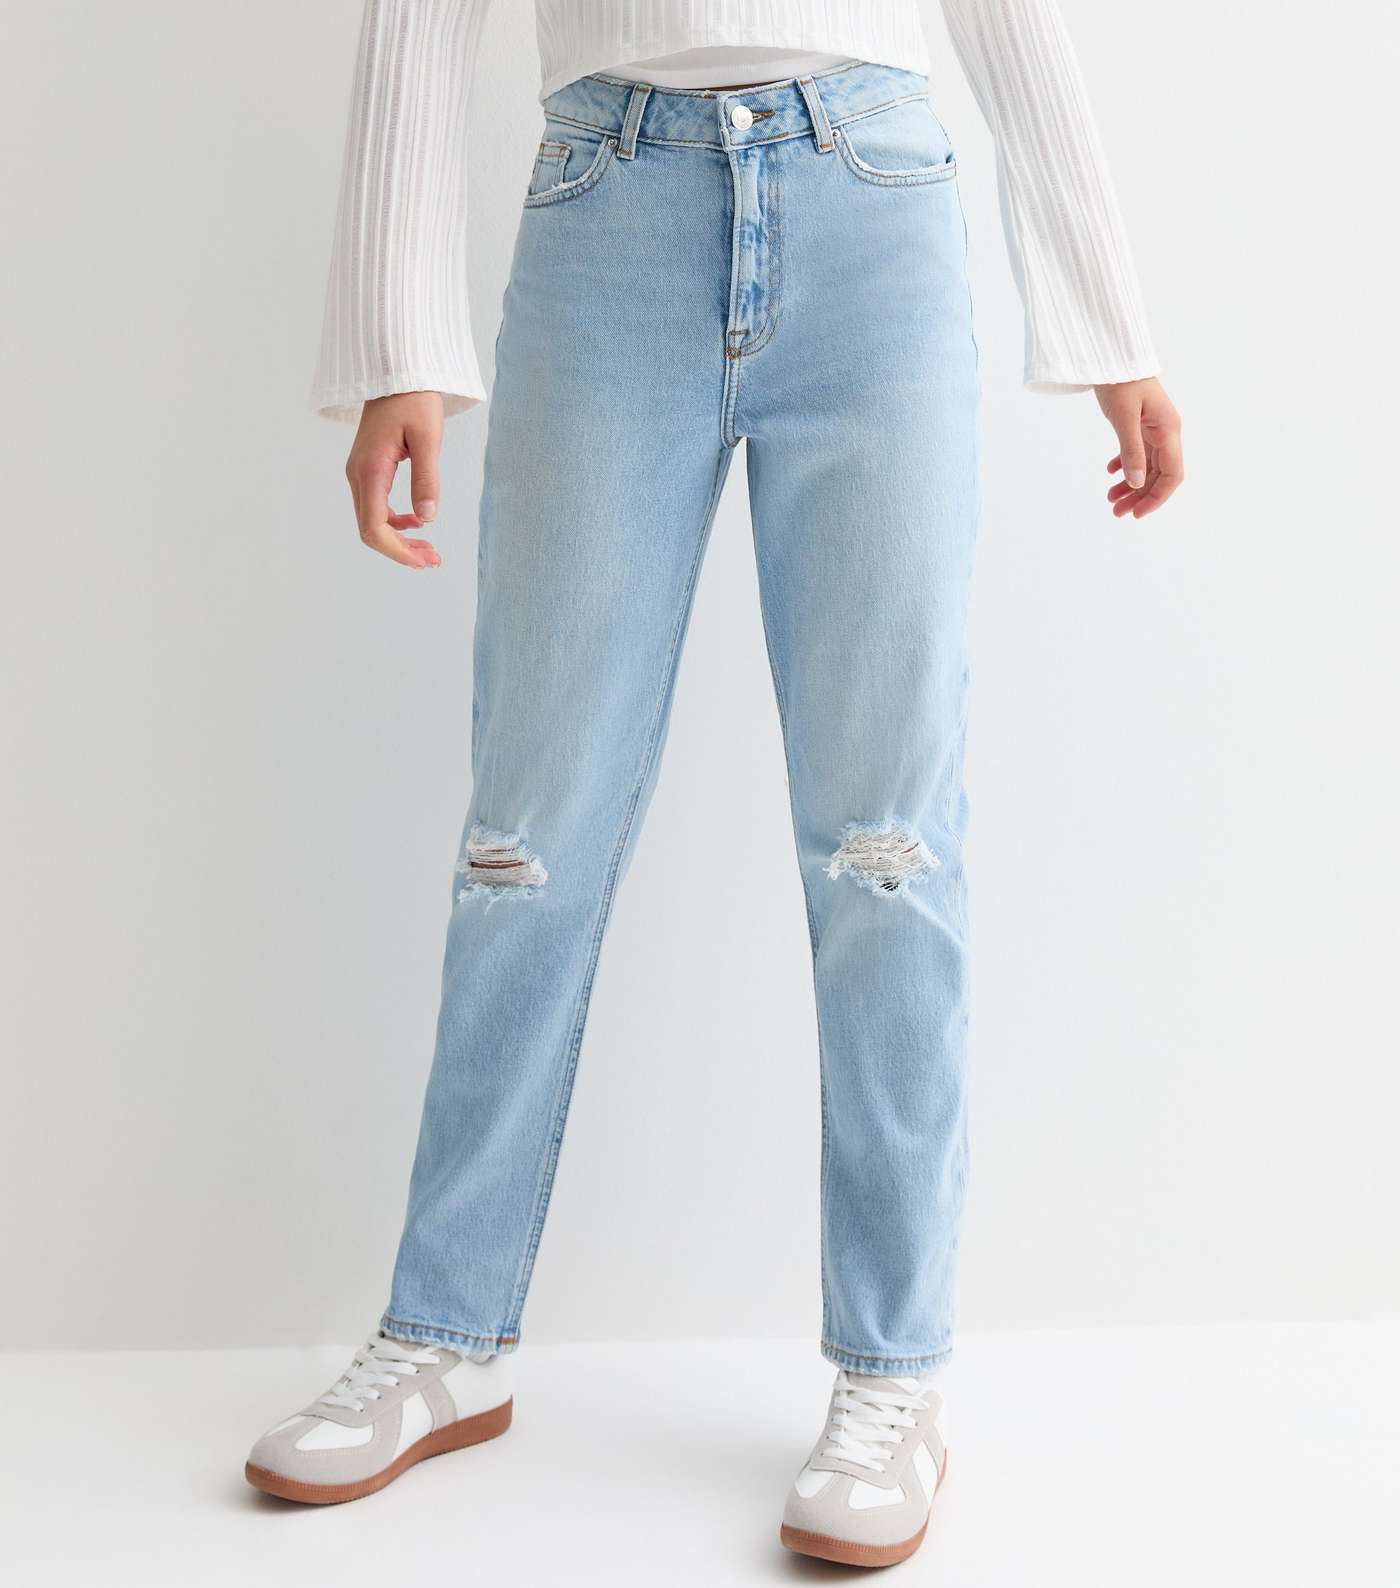 Girls Pale Blue High Waist Ripped Knee Mom Jeans Image 3